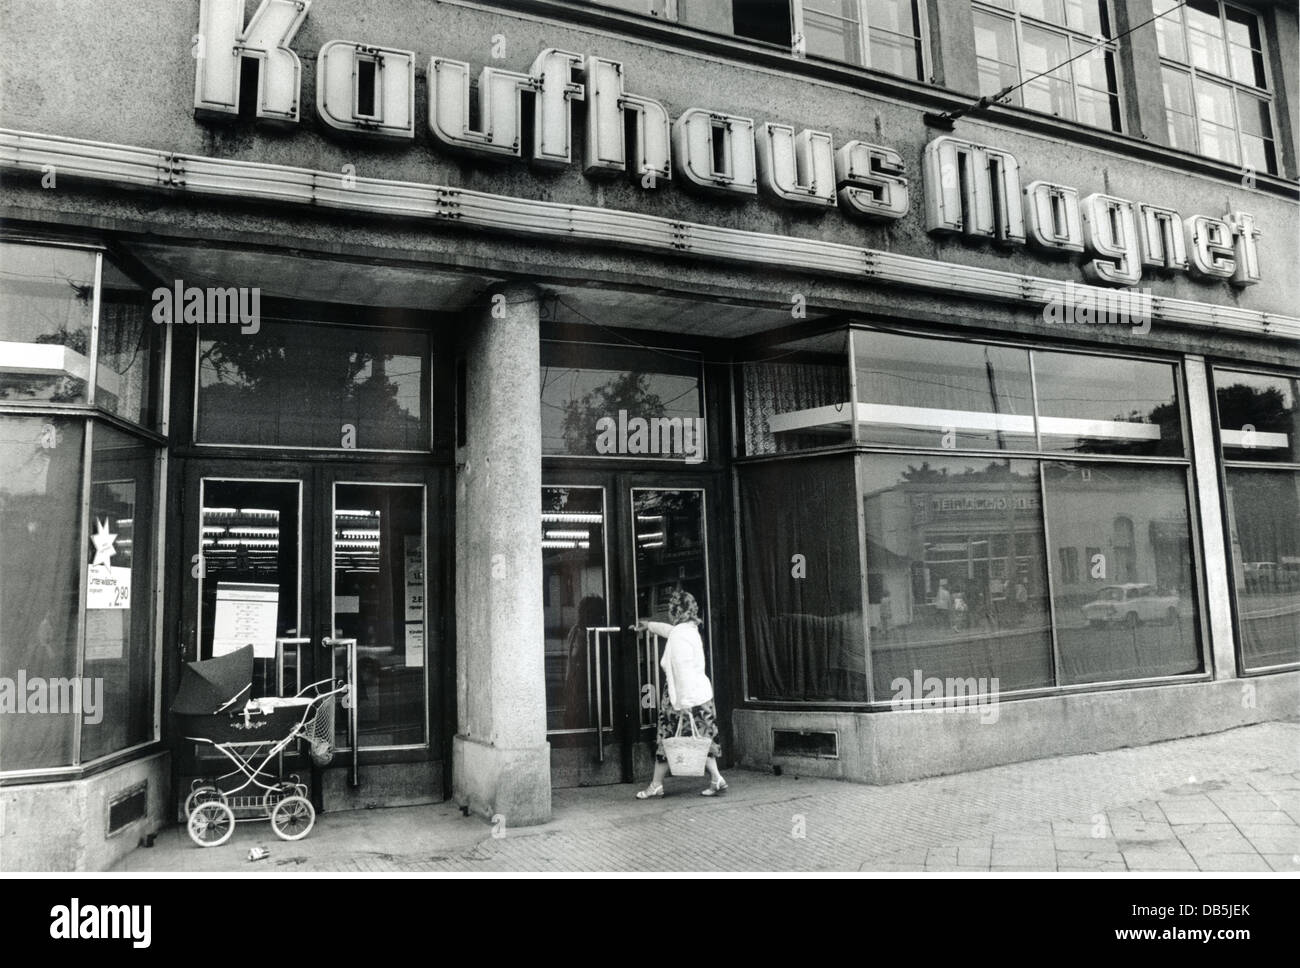 geography / travel,Germany,East-Germany,Dresden,Kaufhaus Magnet,June 1990,East German departmentstore,customer,customers,purchaser,purchasers,shop window,shop windows,empty,economy of scarcity,dreary,dismal,depressing,grey,gray,storefront,storefronts,shop front,shop fronts,shops,store,stores,entrance,entranceway,ramshackle,everyday life,daily routine,East German life,sales,sell,selling,sells,sold,on sale,purchase,buy,purchasing,buying,shop,shopping,turning points,turning point,East German economy,90s,1990s,1990,,Additional-Rights-Clearences-Not Available Stock Photo